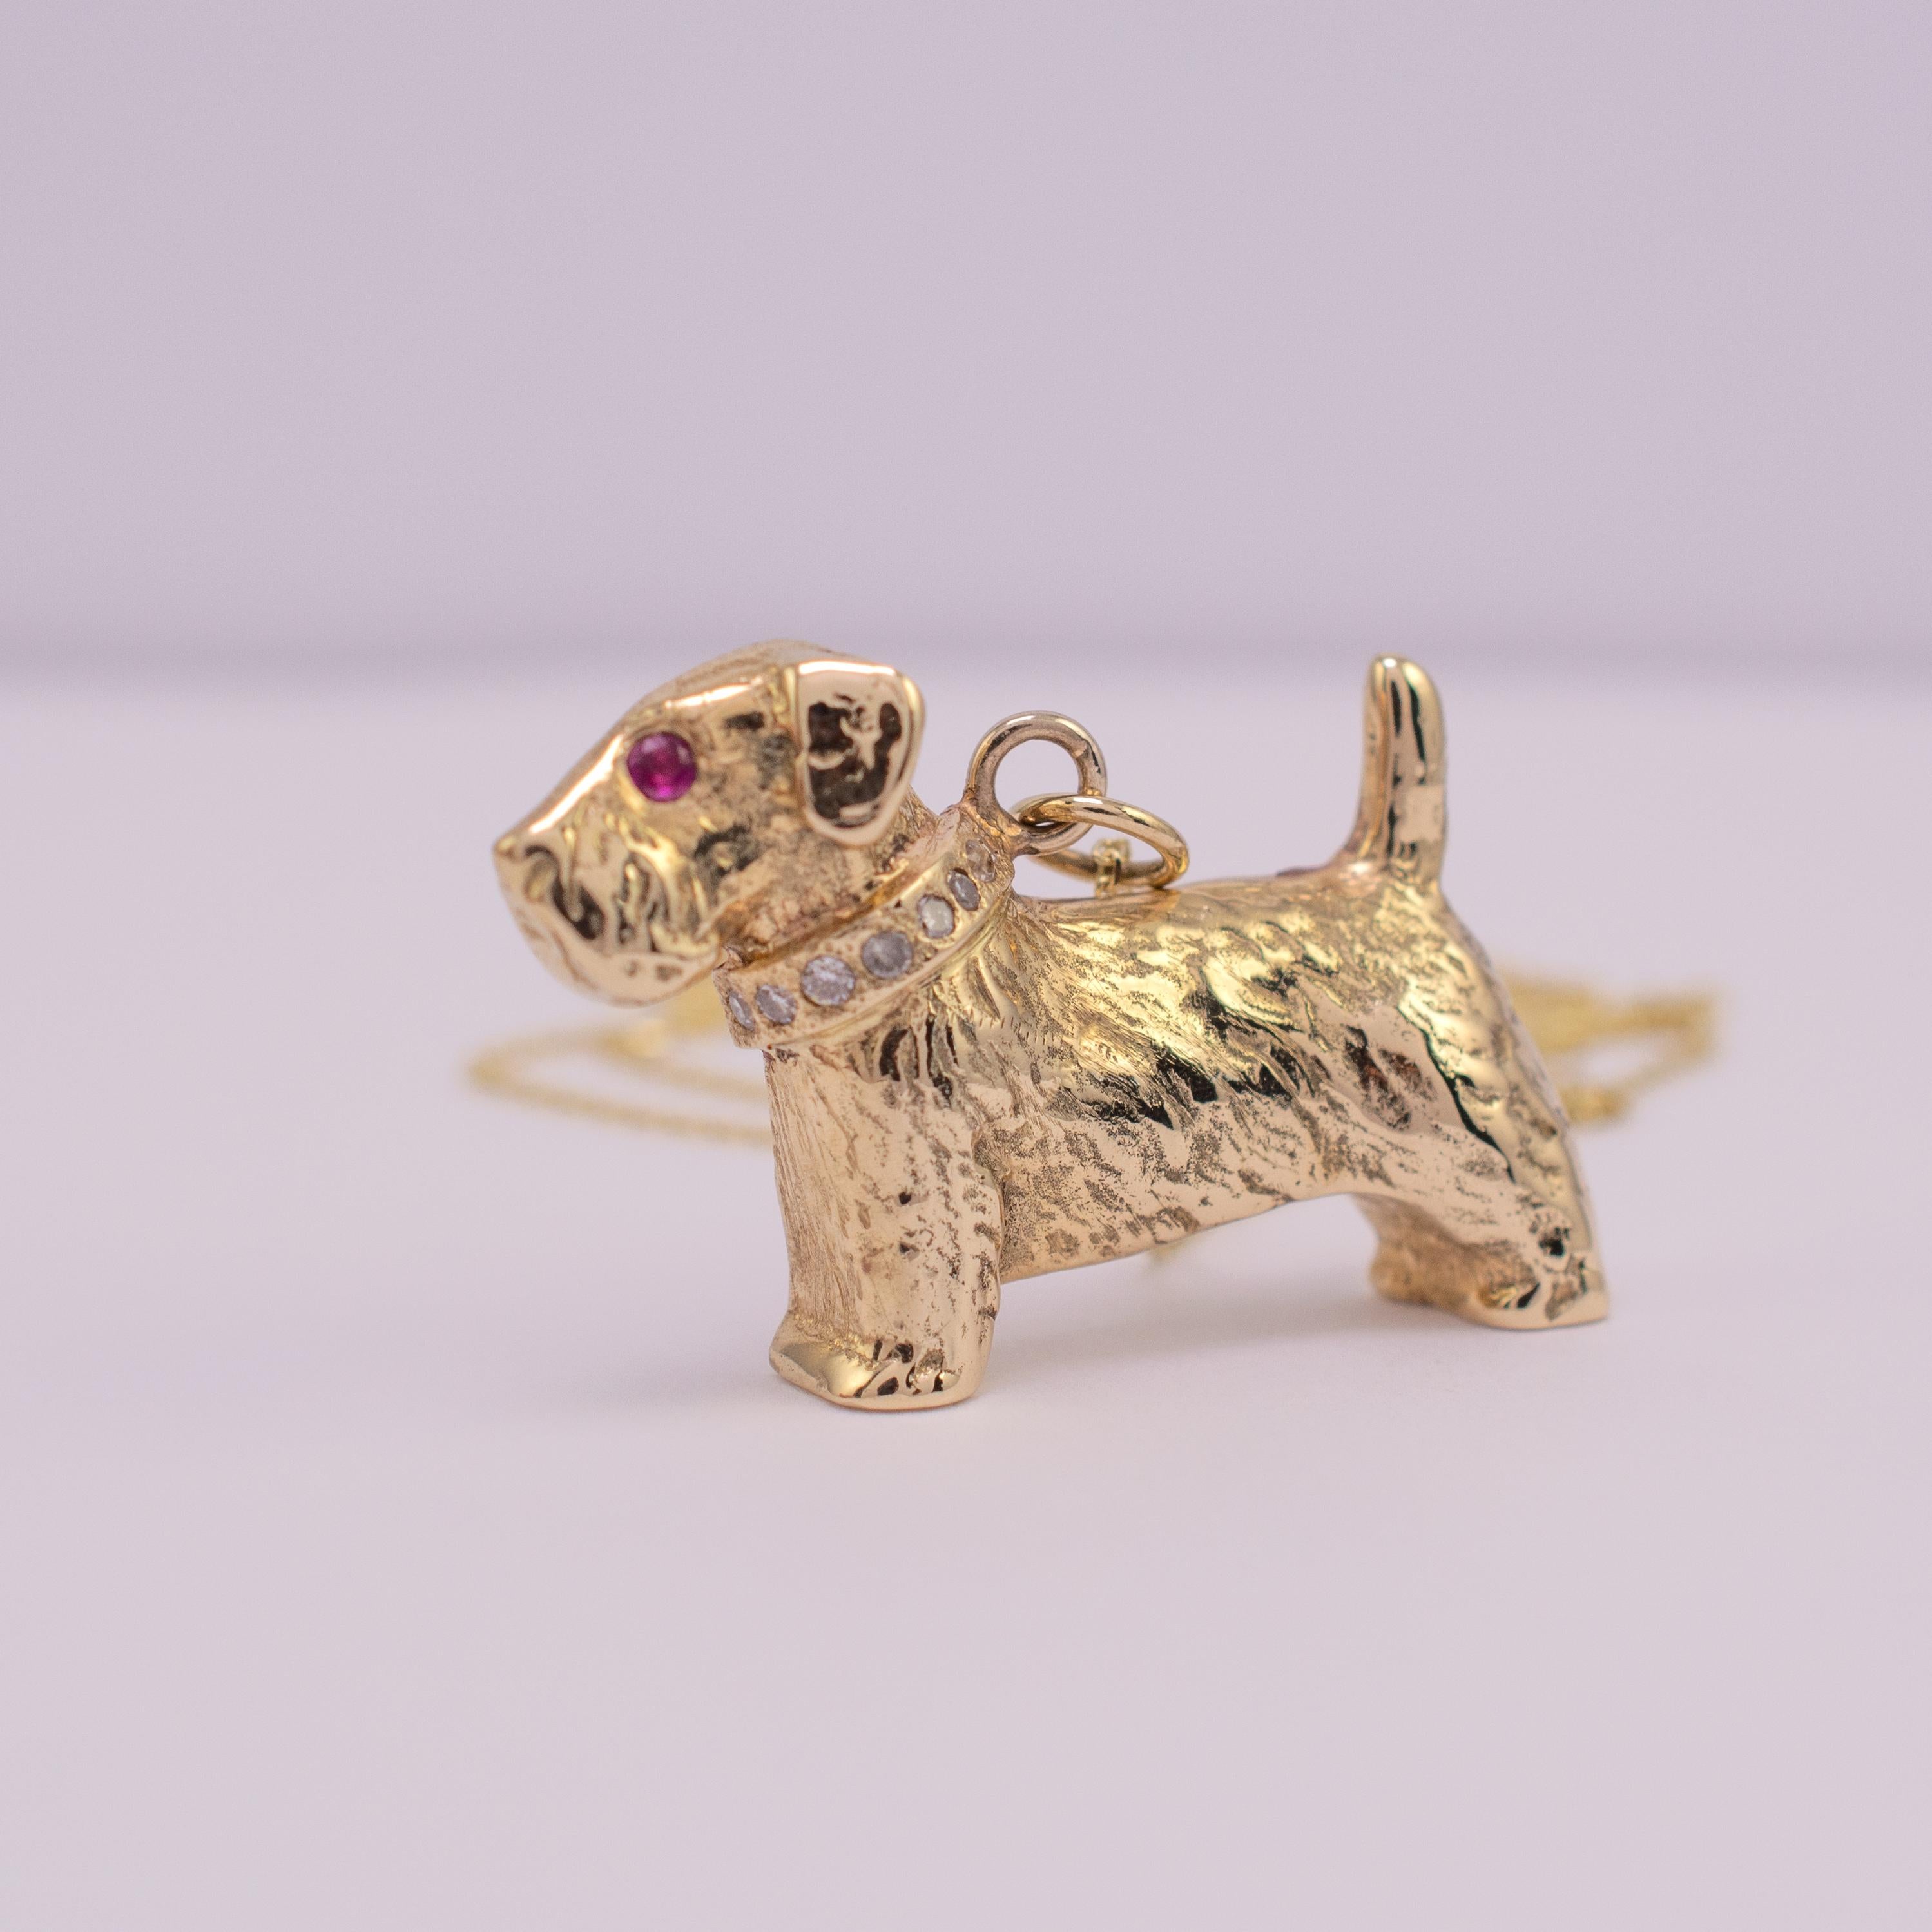 A fabulous 9 karat gold pendant modeled as a Sealyham terrier dog with a ruby eye and 0.8 carats of diamonds set into the collar.

The piece is assay hallmarked and comes complete with complimentary 16